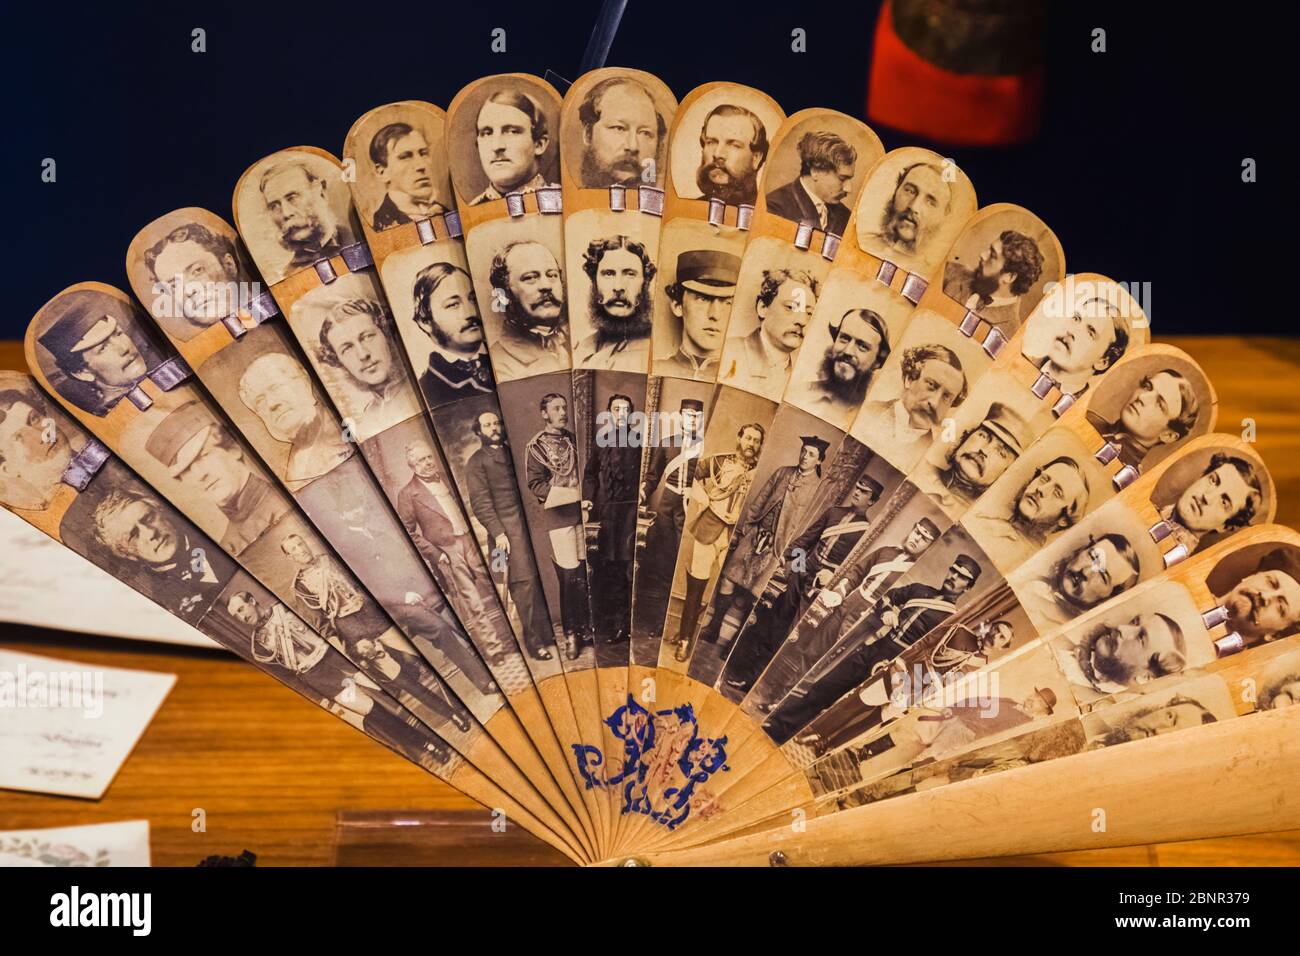 England, London, Westminster, Whitehall, The Household  Cavalry Museum, Exhibit of Lady's Fan dated 1871 Decorated with Portrait Photographs of Offices from The Blues Stock Photo